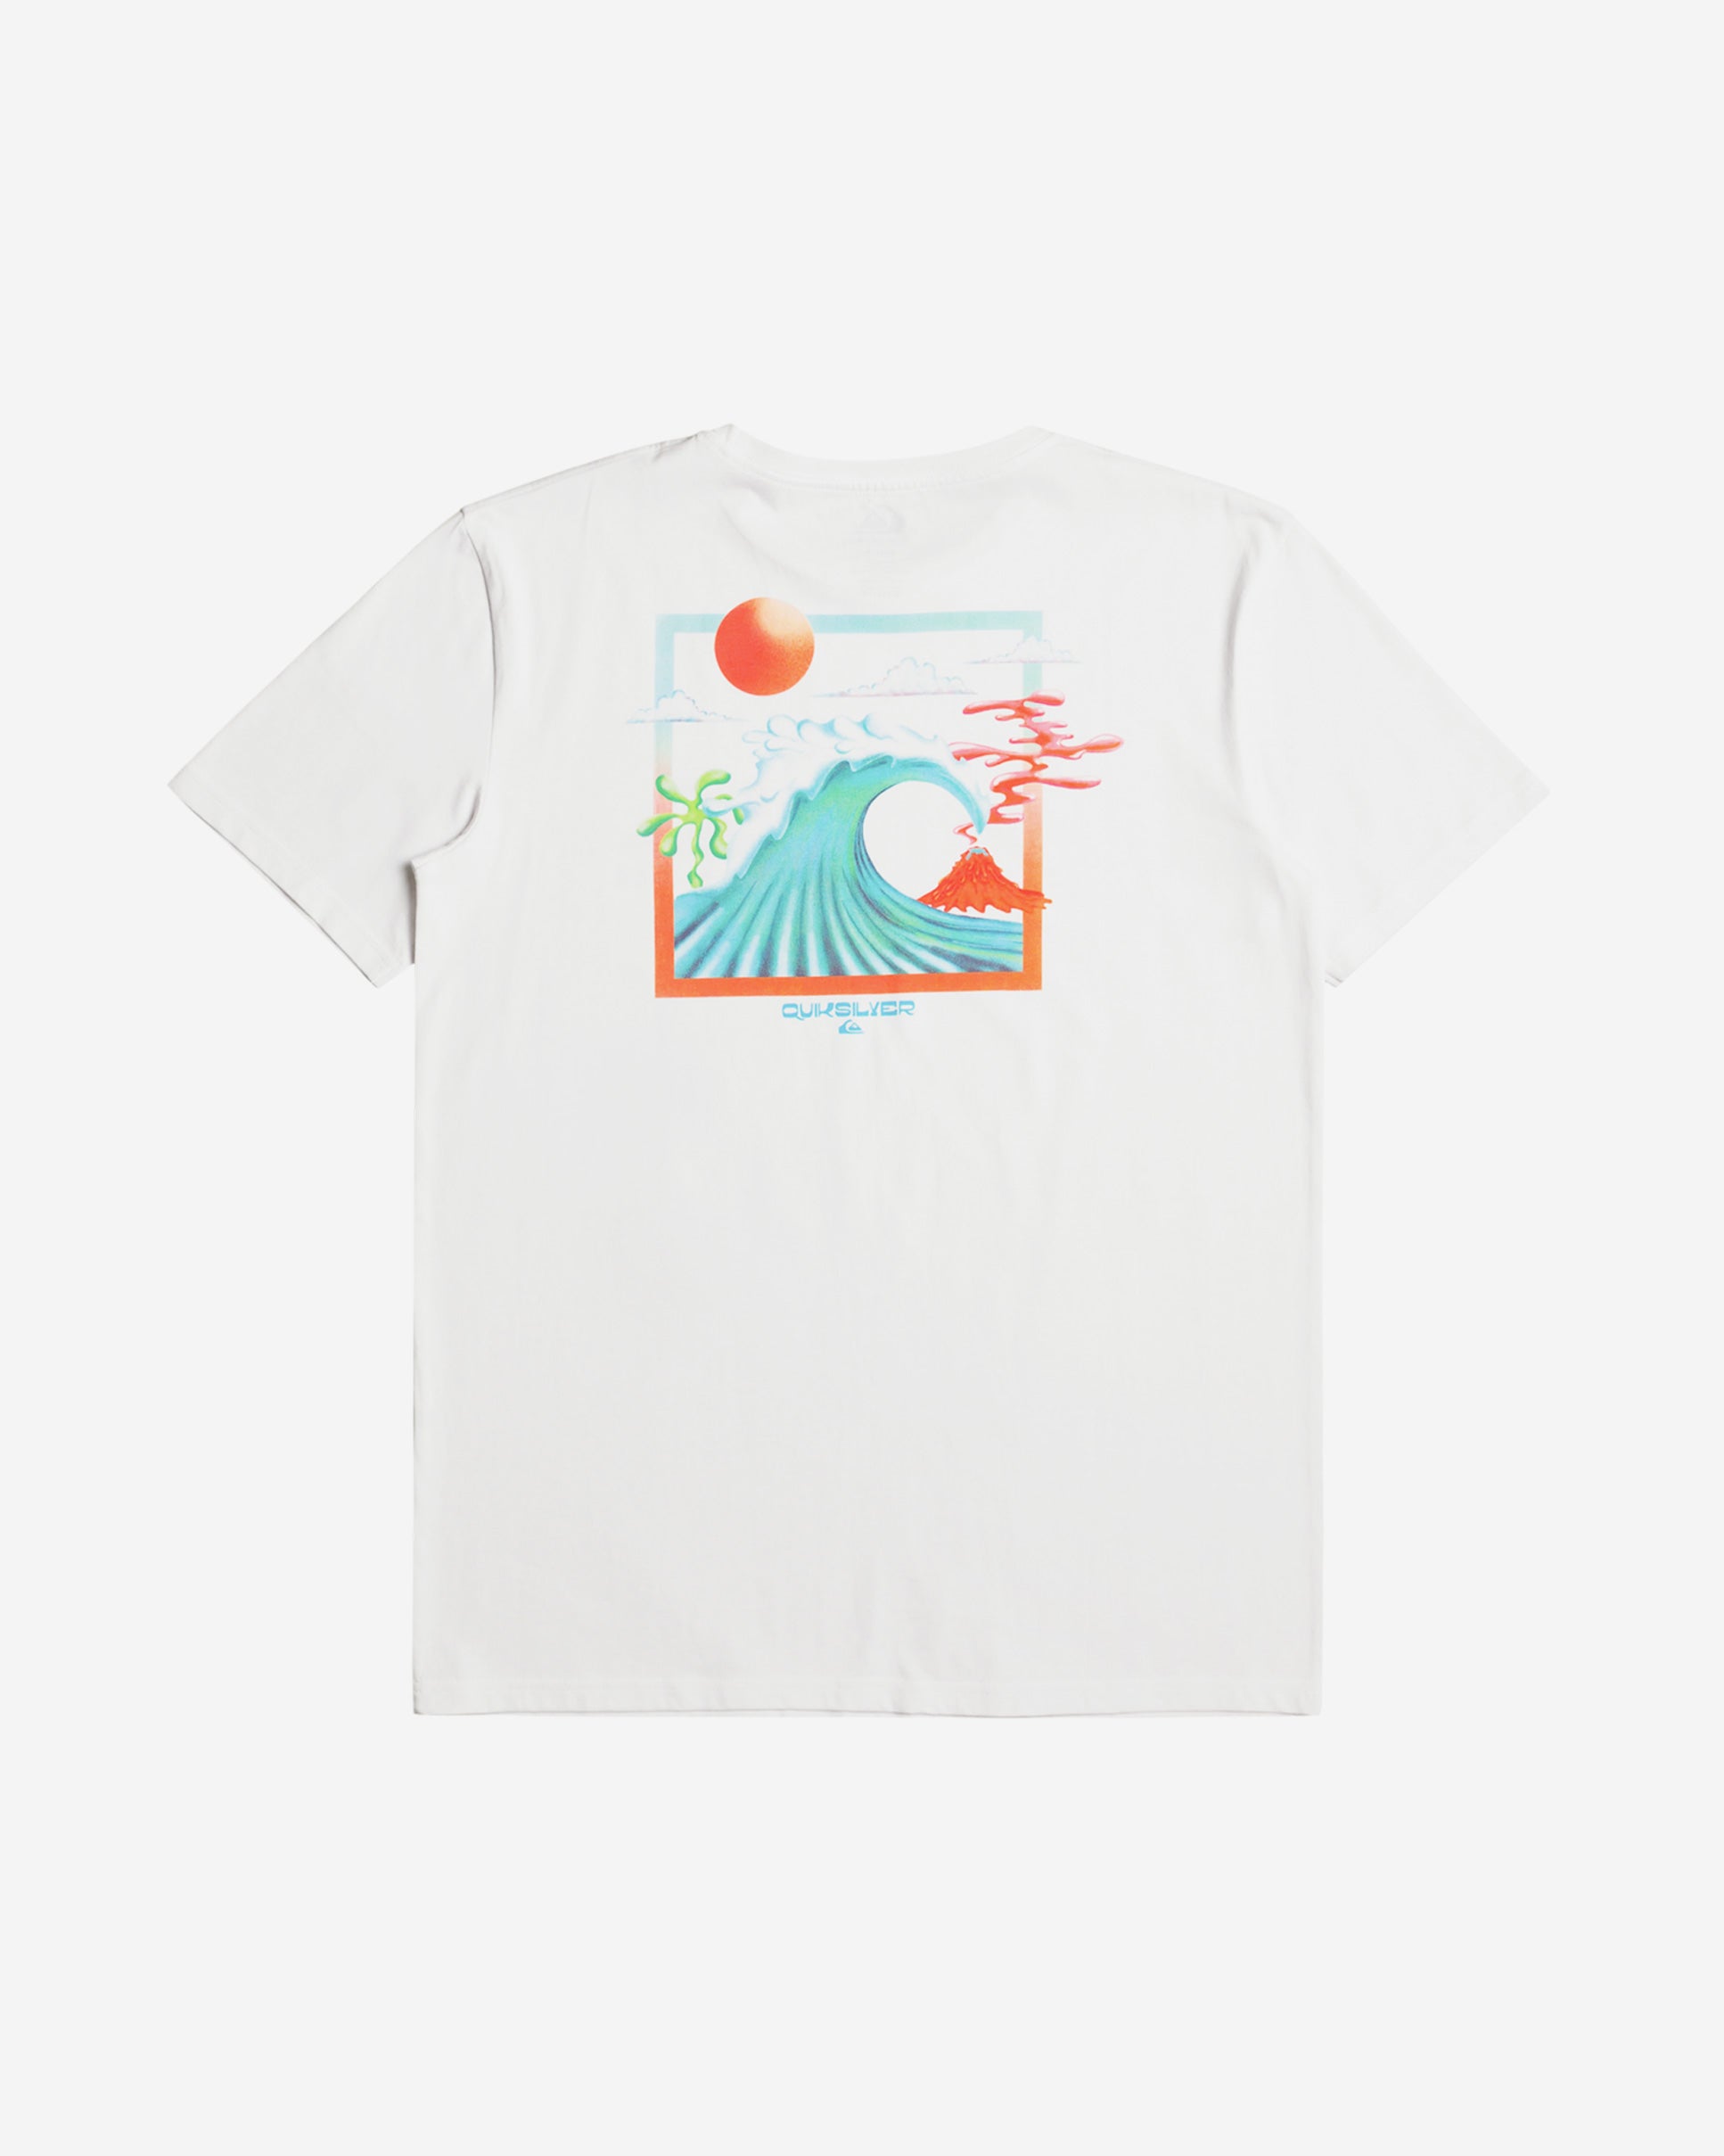 It doesn't get more epic than the Ocean Bed t-shirt. Intense art and the comfort of combed cotton make it a surfer's favorite.